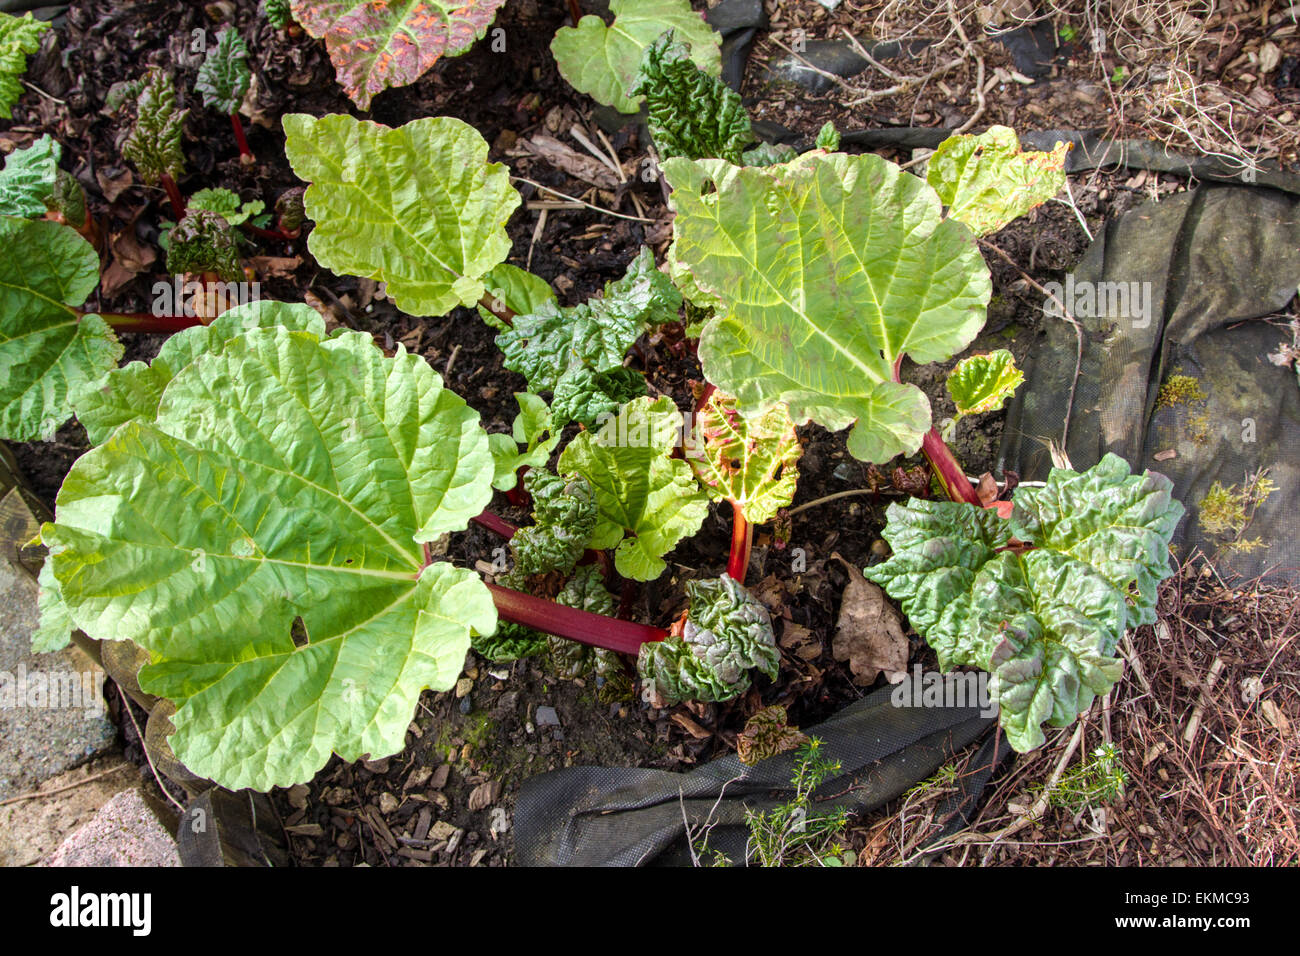 'The start of a new year' New rhubarb stalks in the spring sunshine in a Surrey Garden Stock Photo